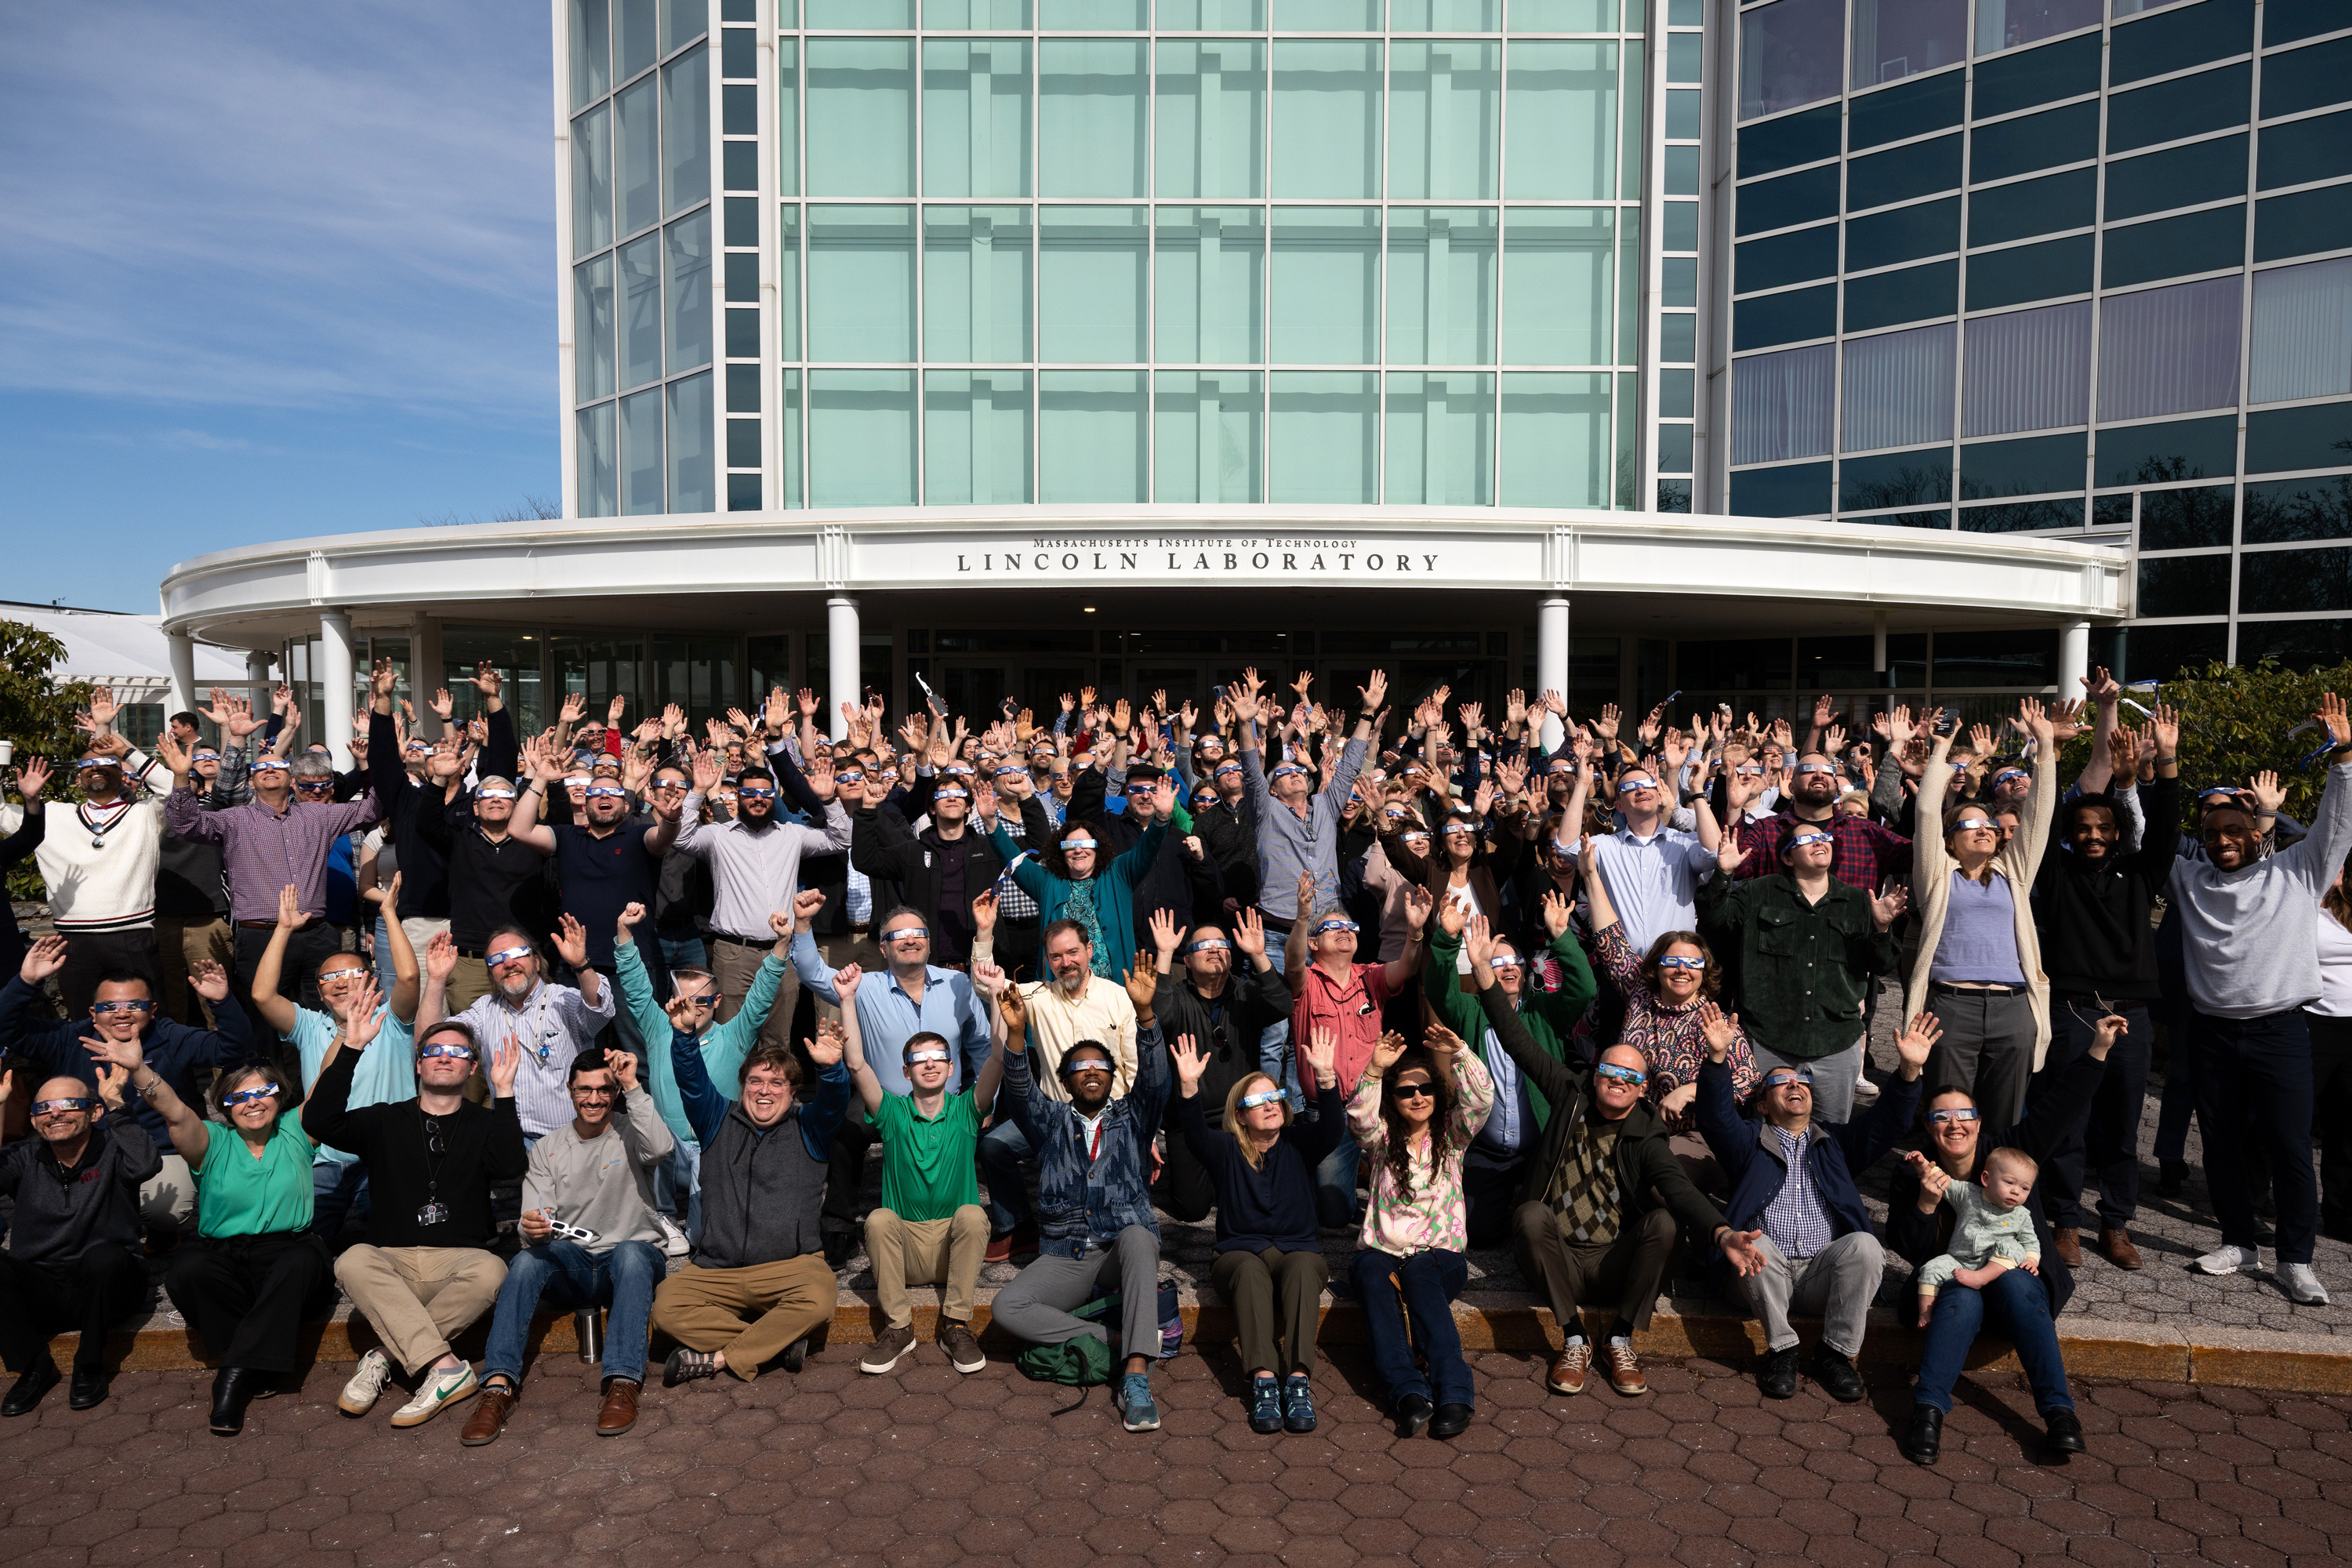 A huge crowd at the Lincoln Laboratory poses for group photo, hands up in there.